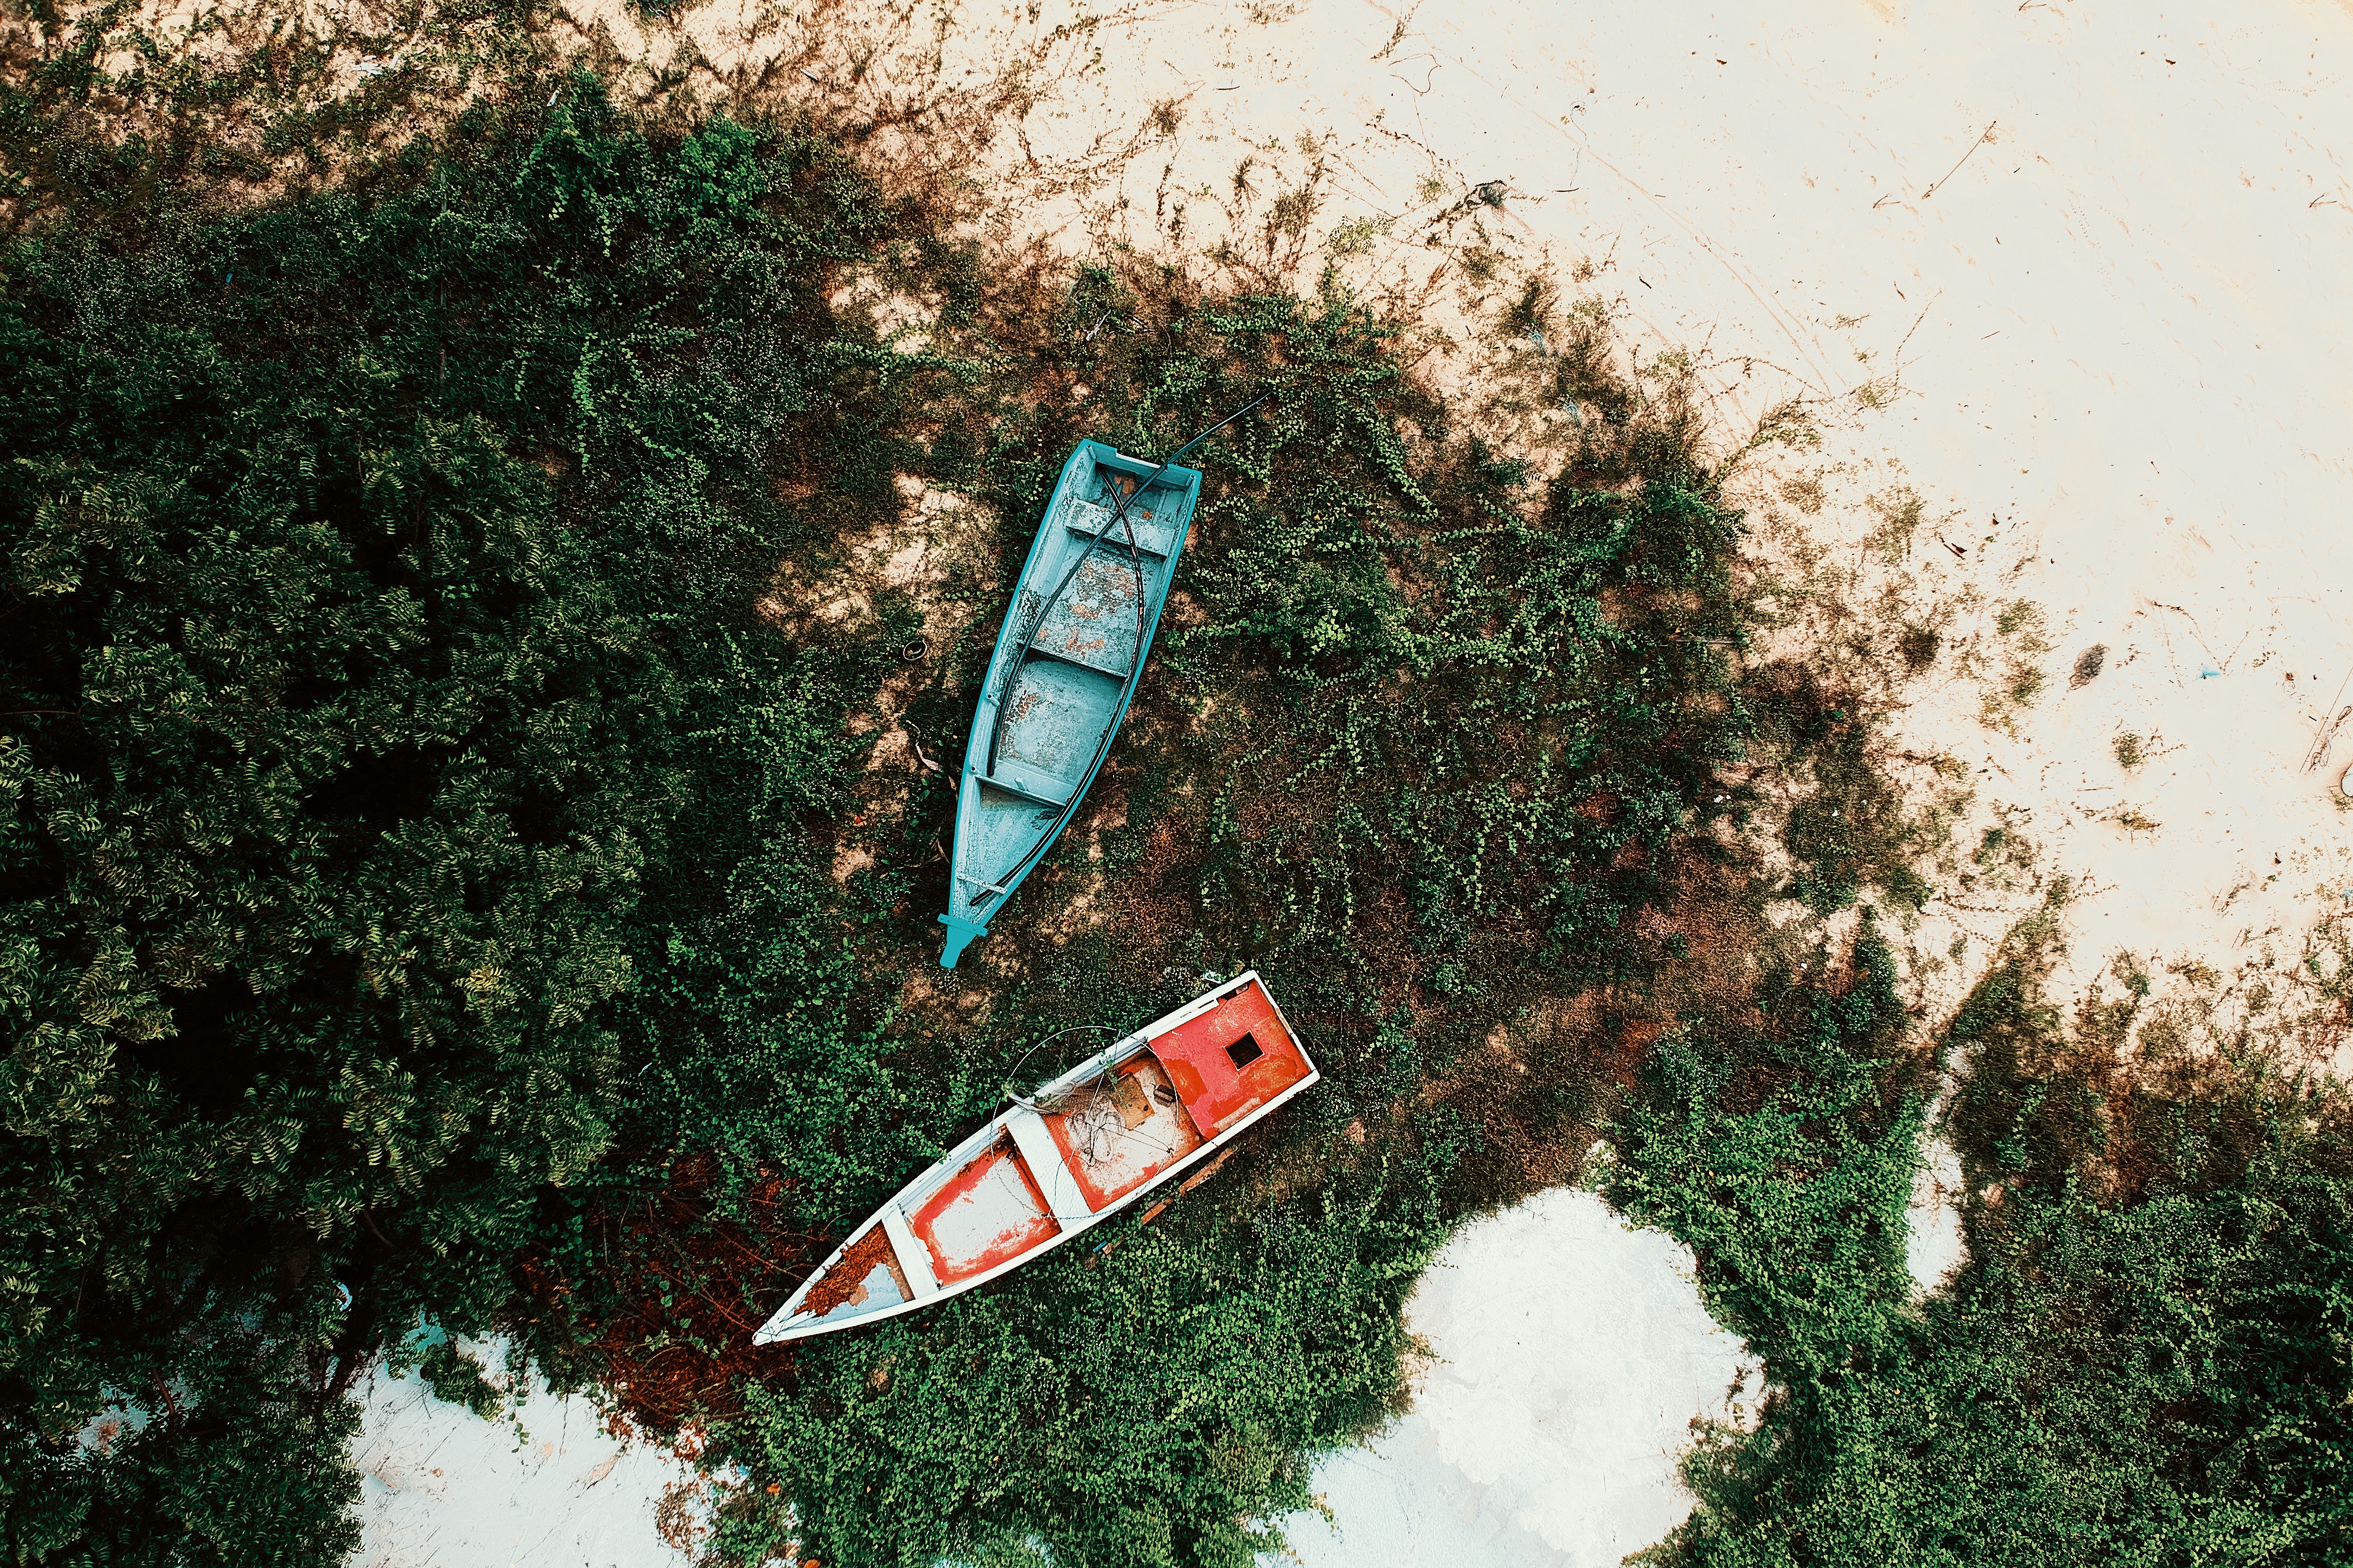 Top view of red and blue boats placed on grass growing on a sandy shore